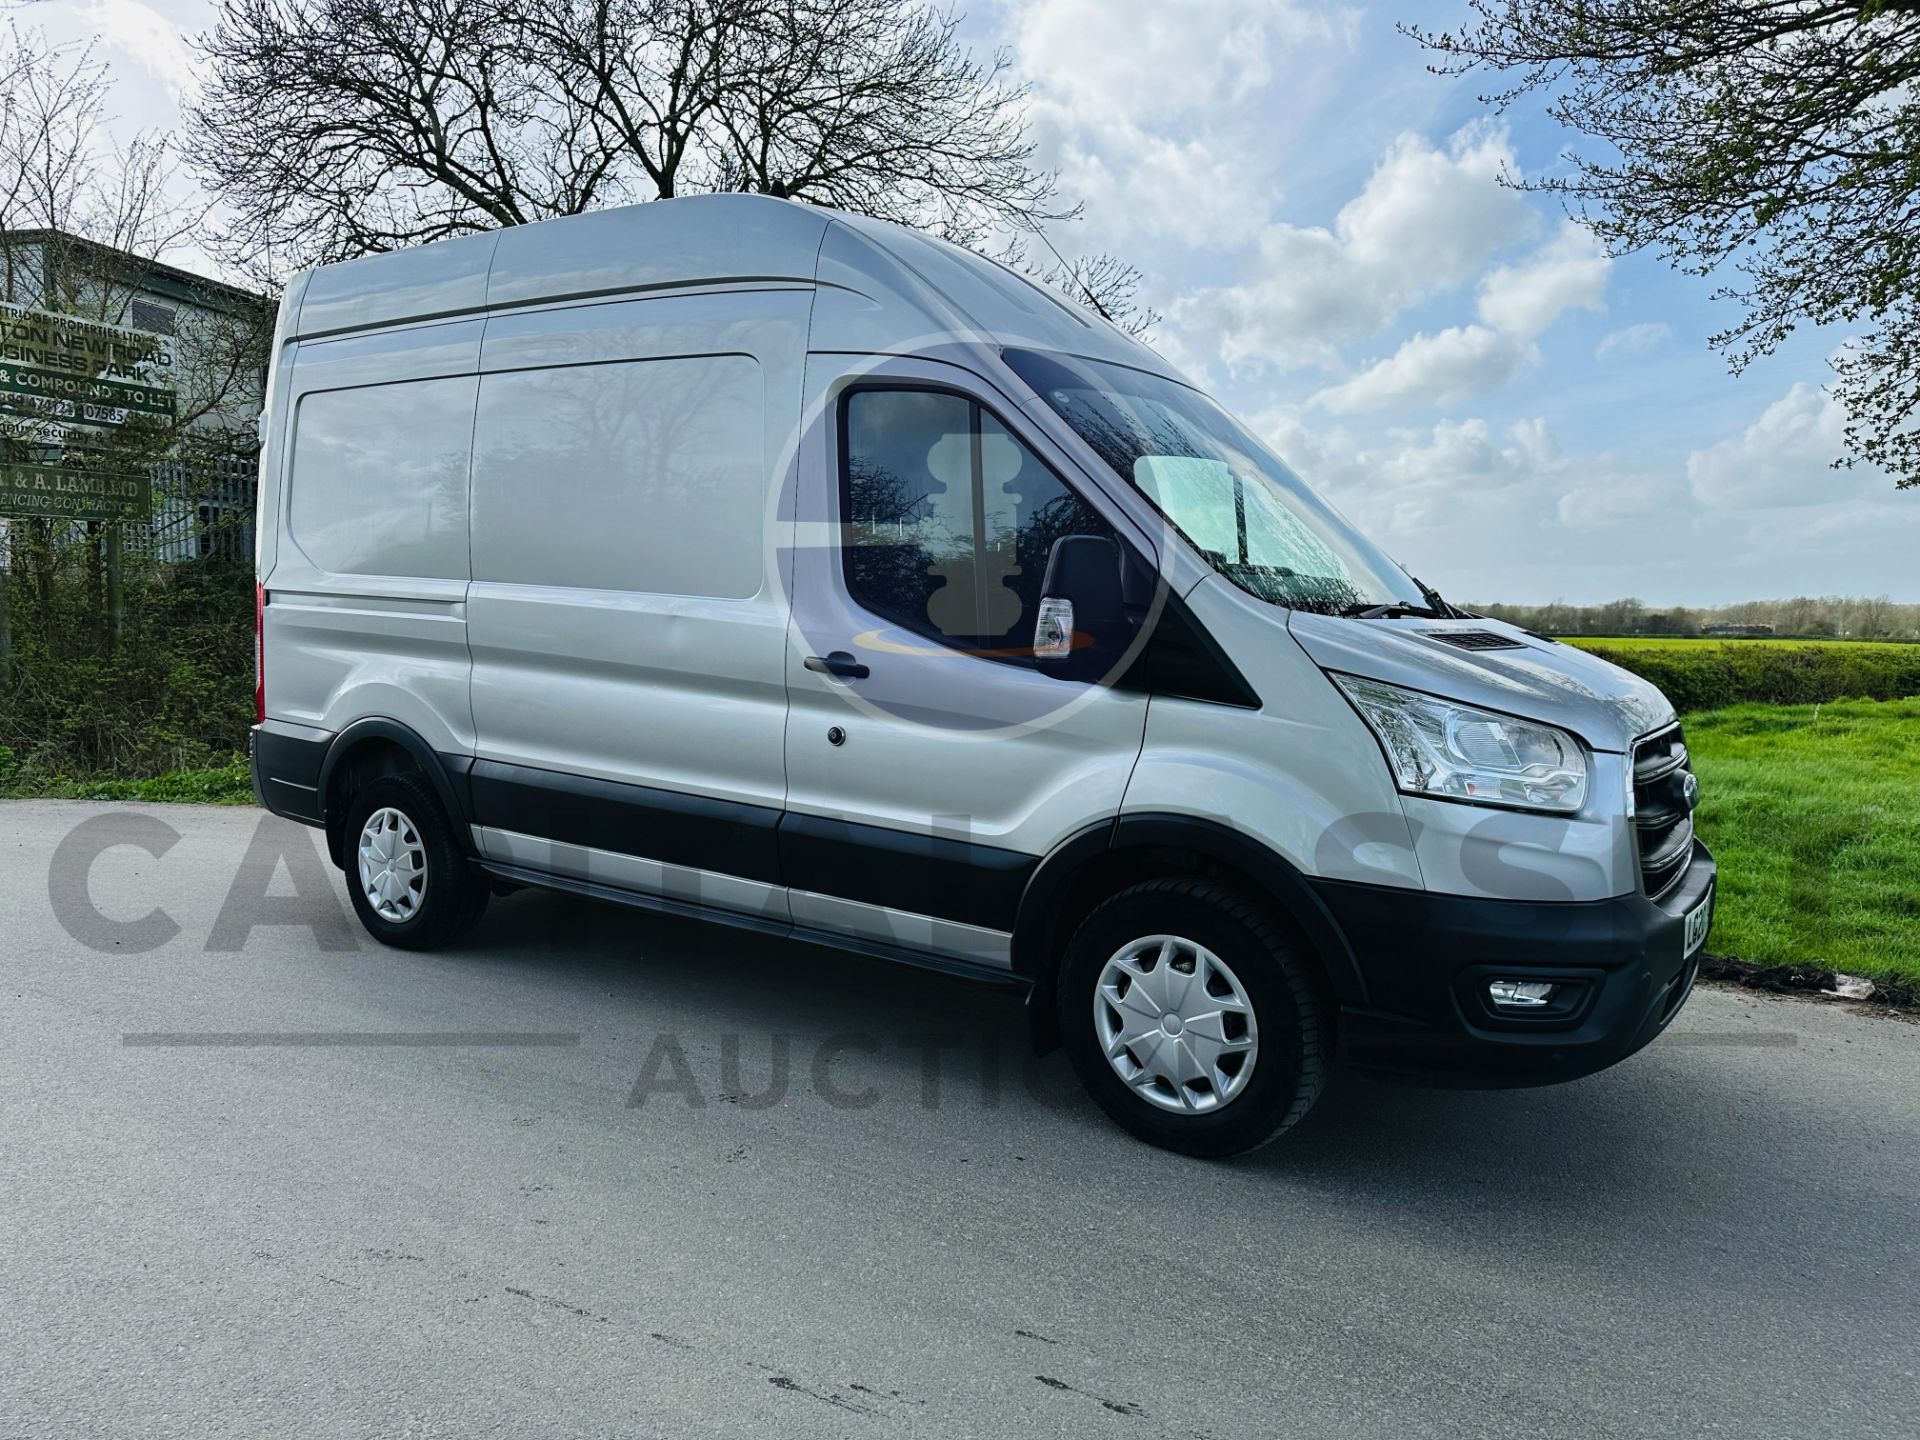 FORD TRANSIT 2.0TDCI (130) *TREND* LWB HIGH ROOF WITH ELECTRIC REAR TAIL LIFT - 20 REG - AIR CON